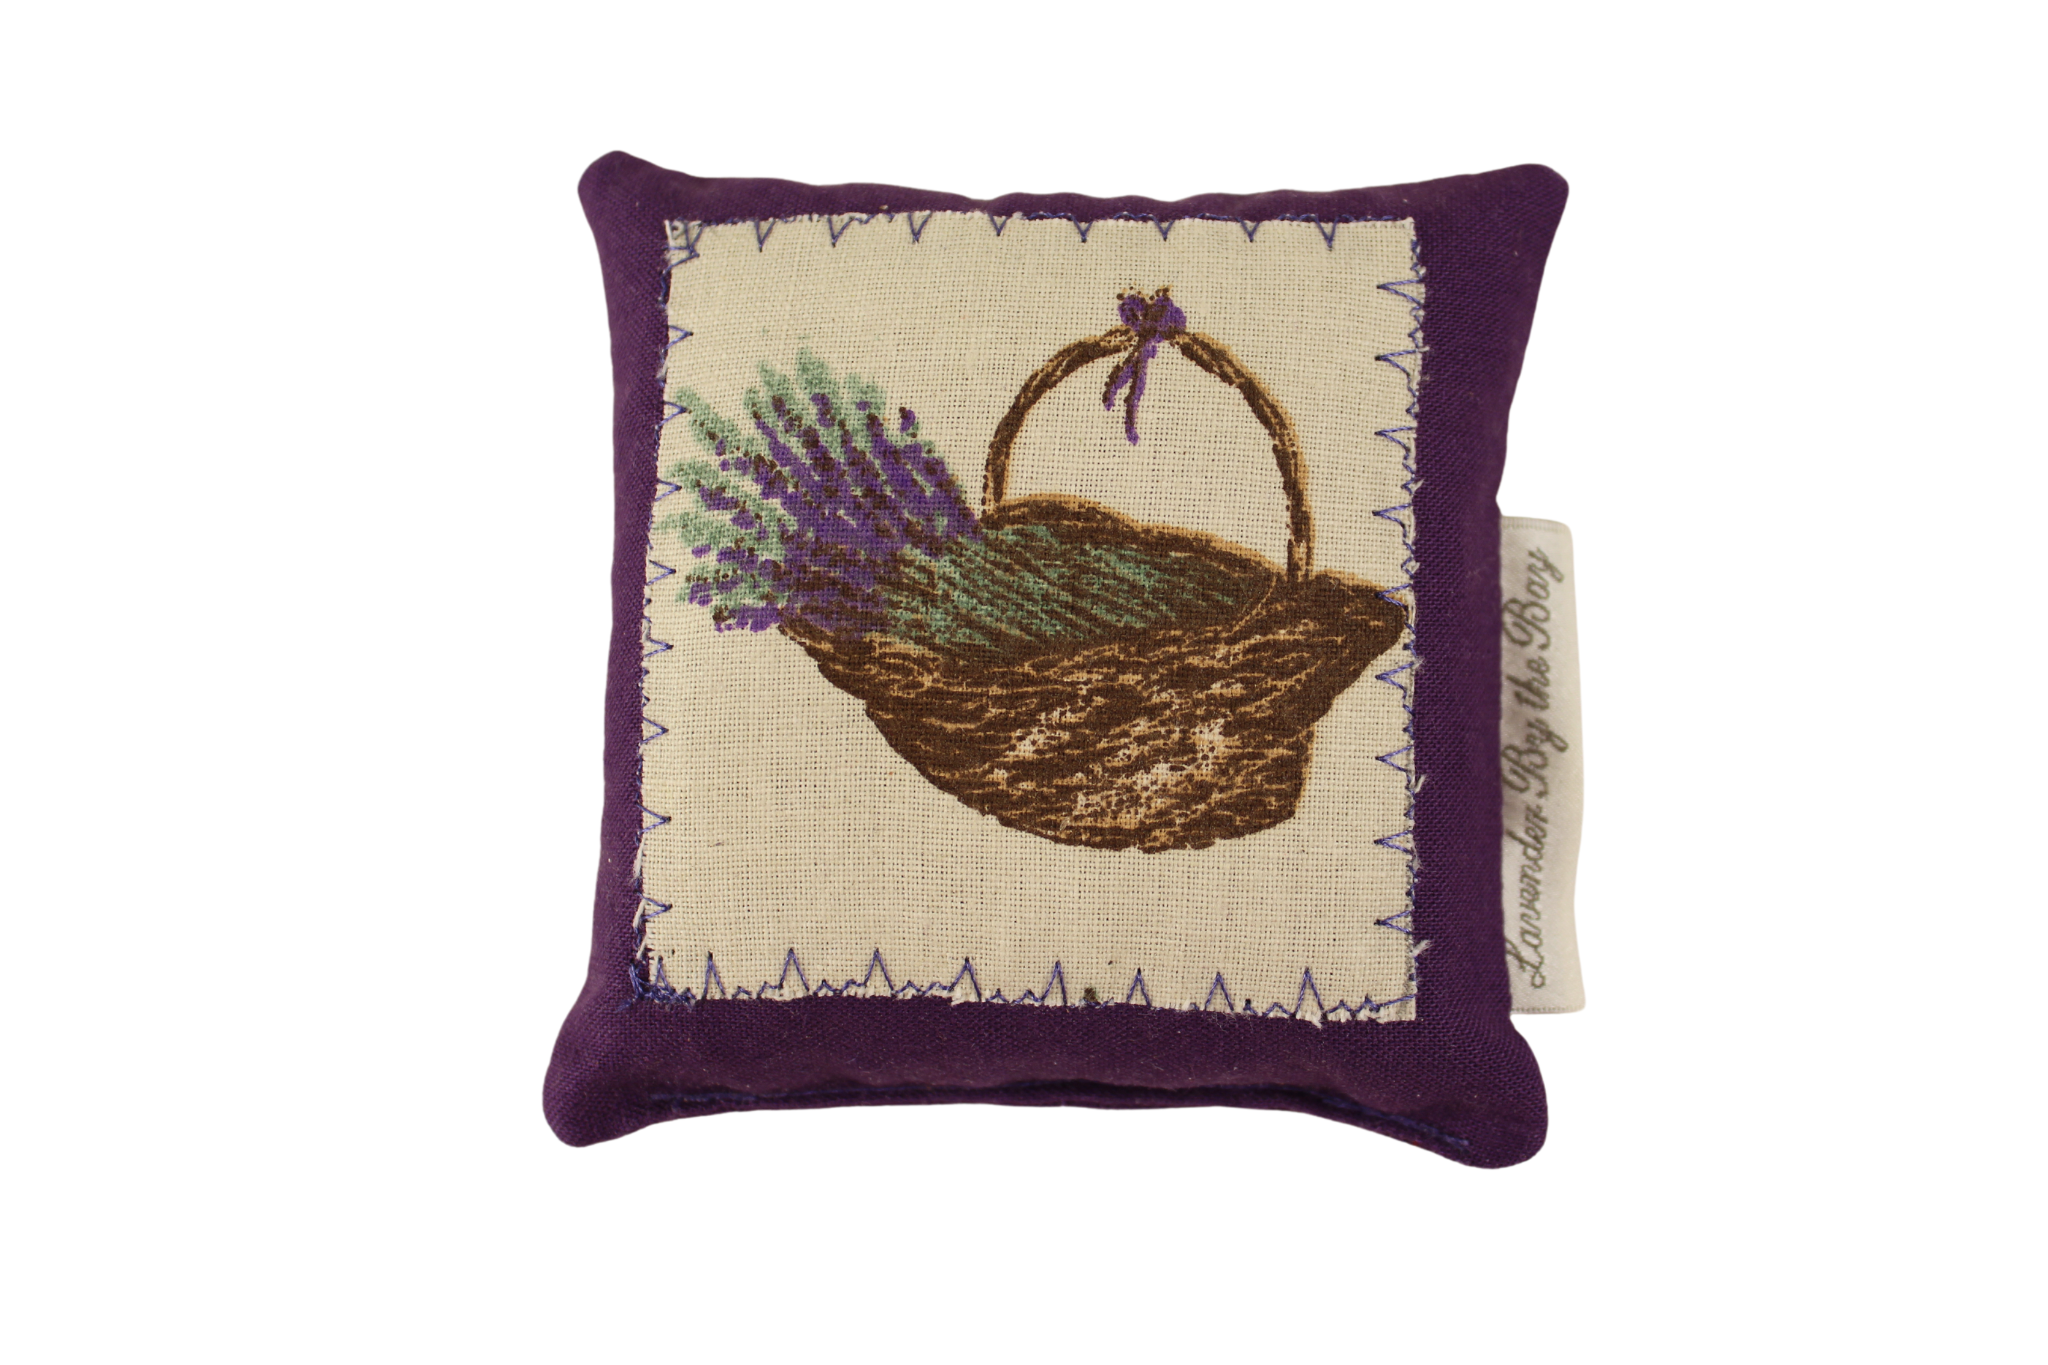 Vintage 8X8 Inch Lavender Sachet Pillow Embroidered with Mother